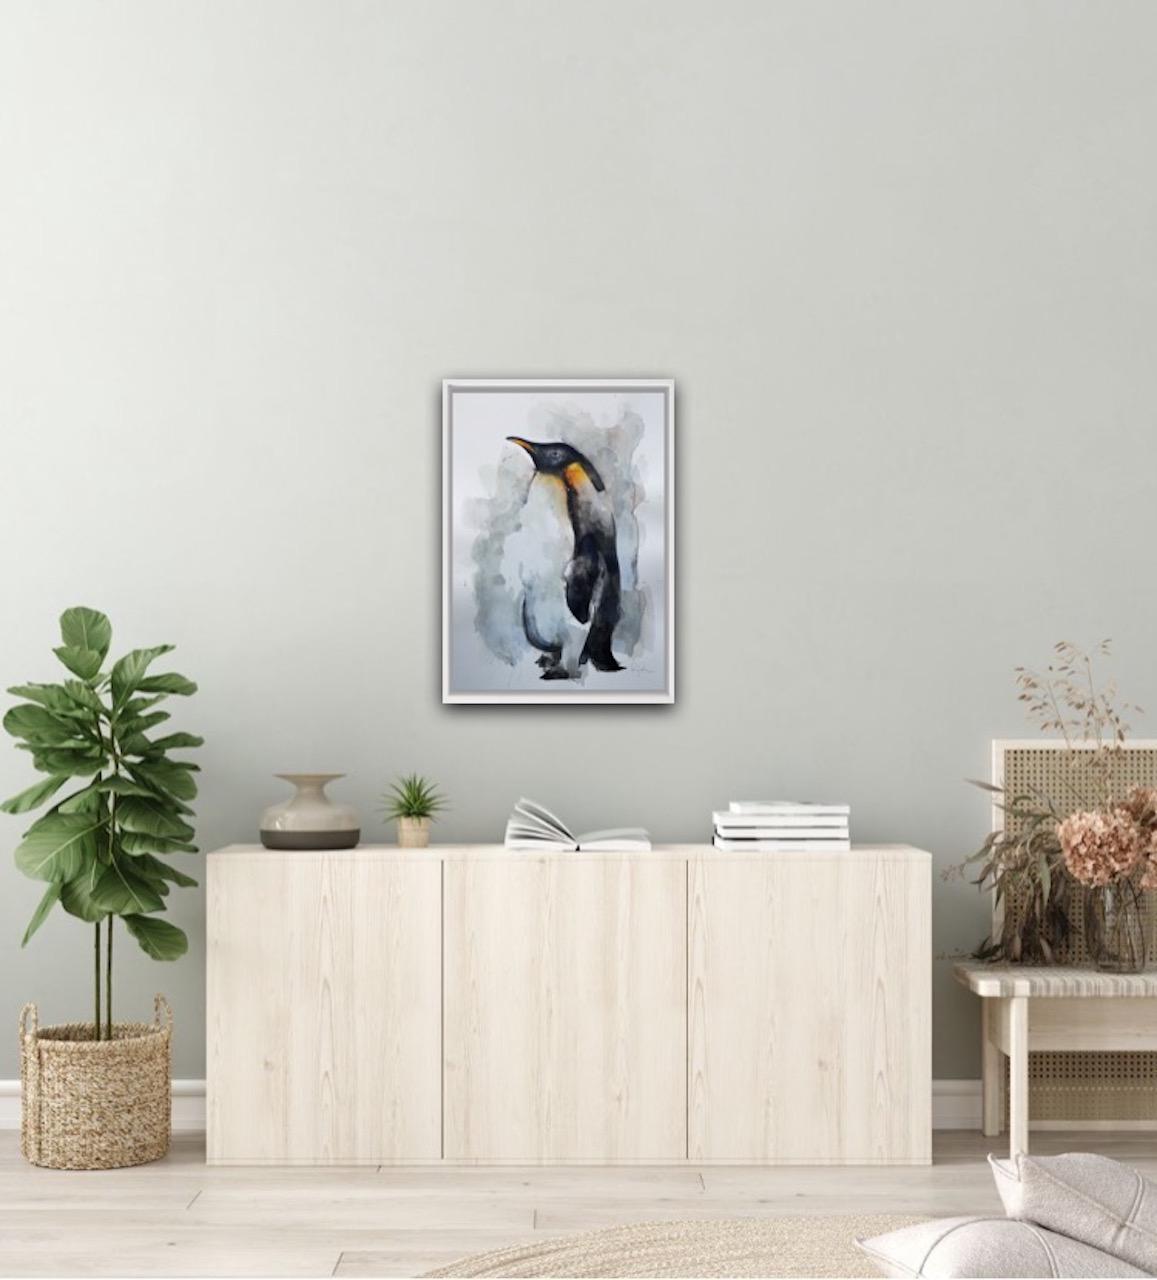 Gavin Dobson
Penguin
Impressionist Still Life Painting
Watercolour Paint on Paper
Size: H 42cm x W 29.7cm x D 0.1cm
Sold Unframed
Please note that insitu images are purely an indication of how a piece may look.

Penguin is an original animal